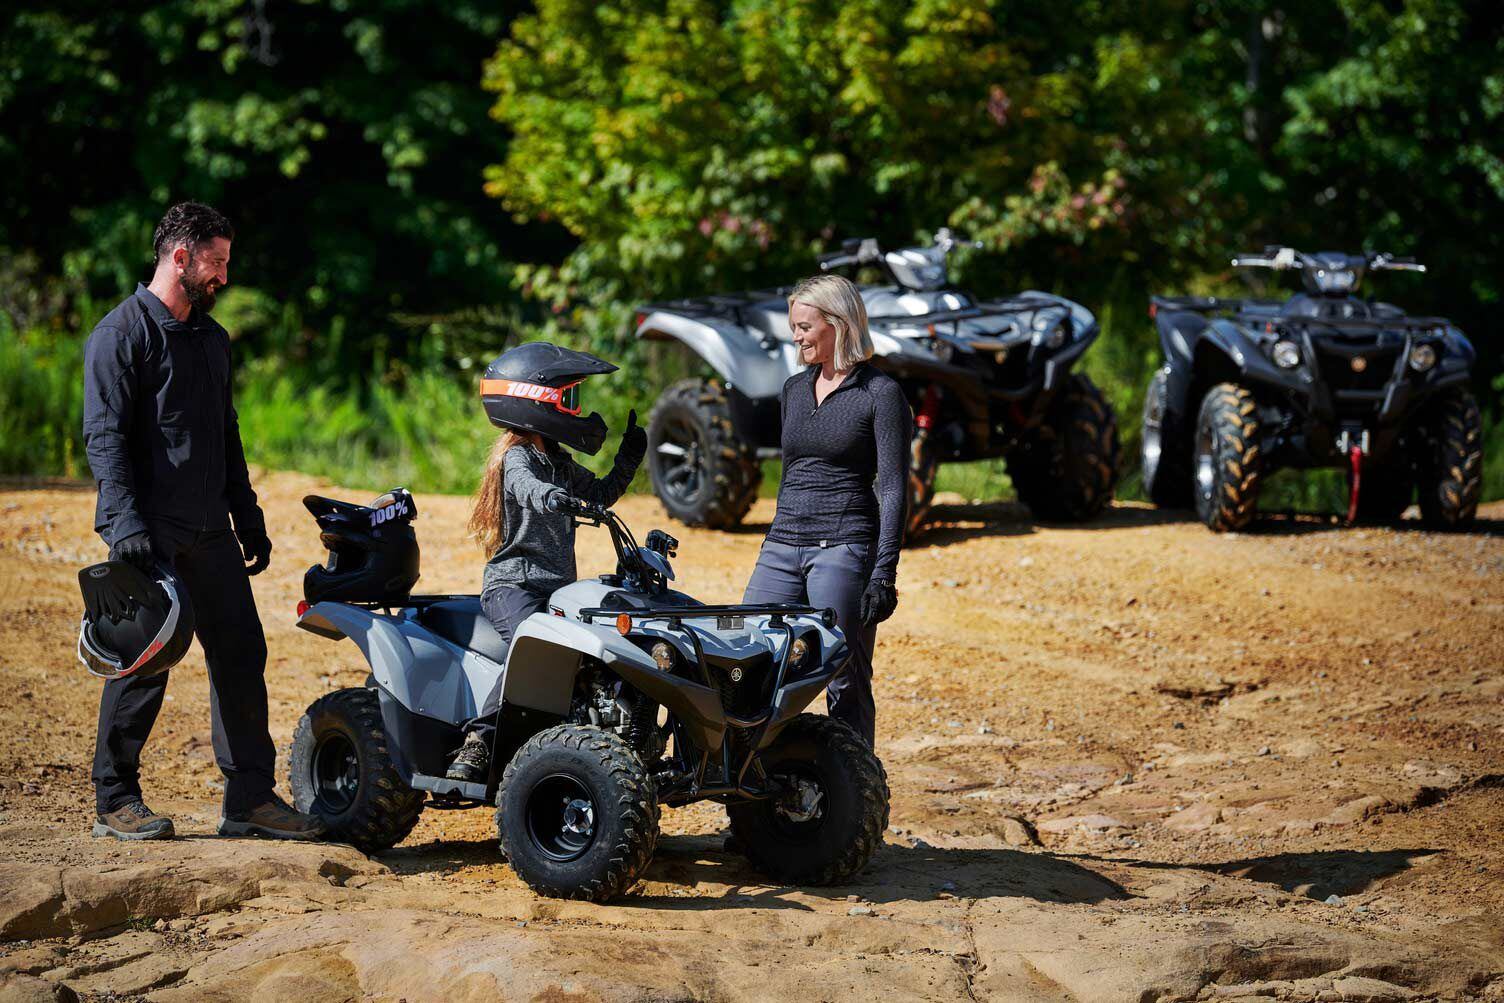 The 2022 Yamaha Grizzly 90 is designed to look just like the full-size Grizzly 700.